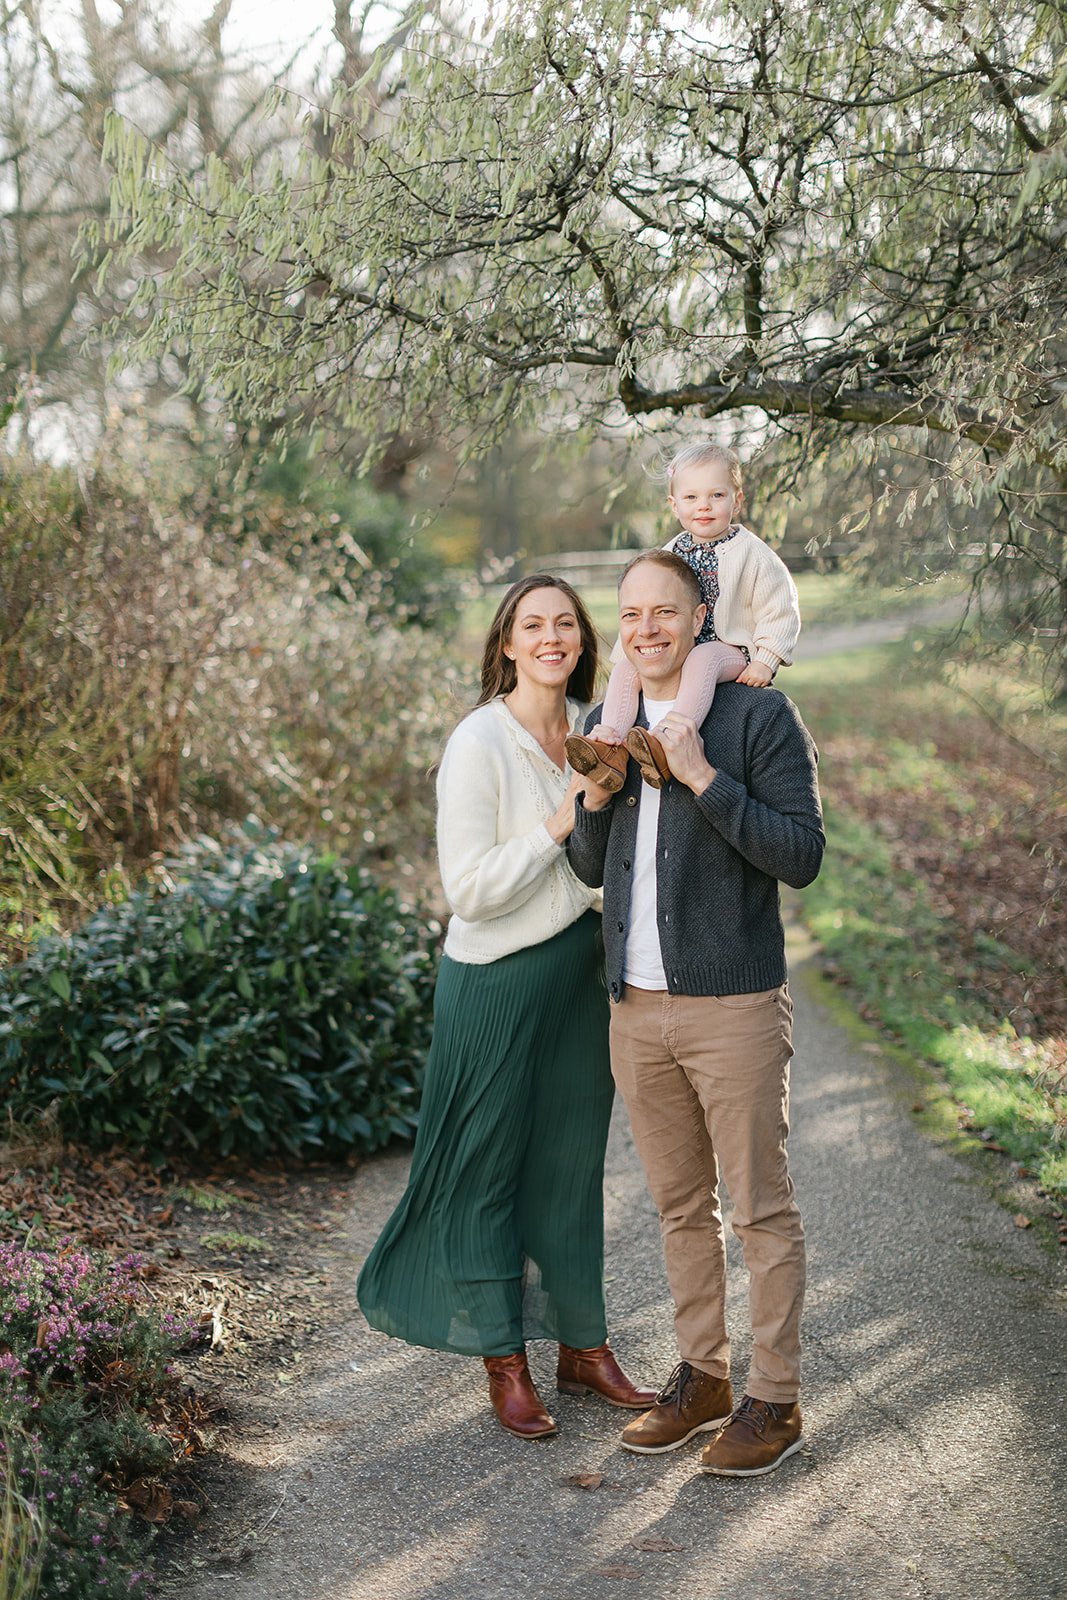  Family photographer portrait of family smiling in richmond park London 